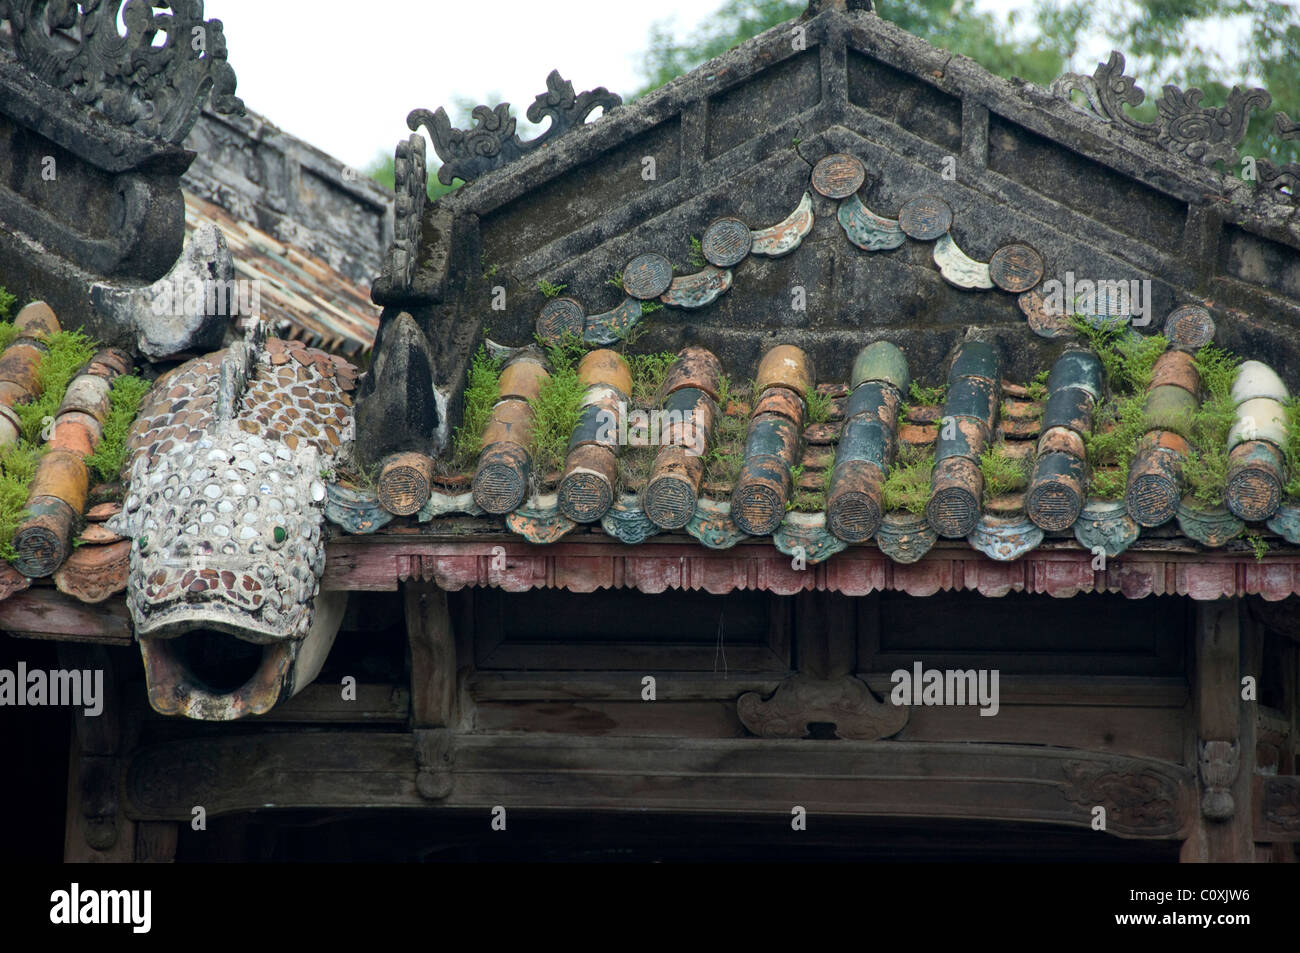 Asia, Vietnam, Da Nang. Old imperial capital city of Hue. Emperor Tu Duc's Tomb complex, roof detail. Stock Photo